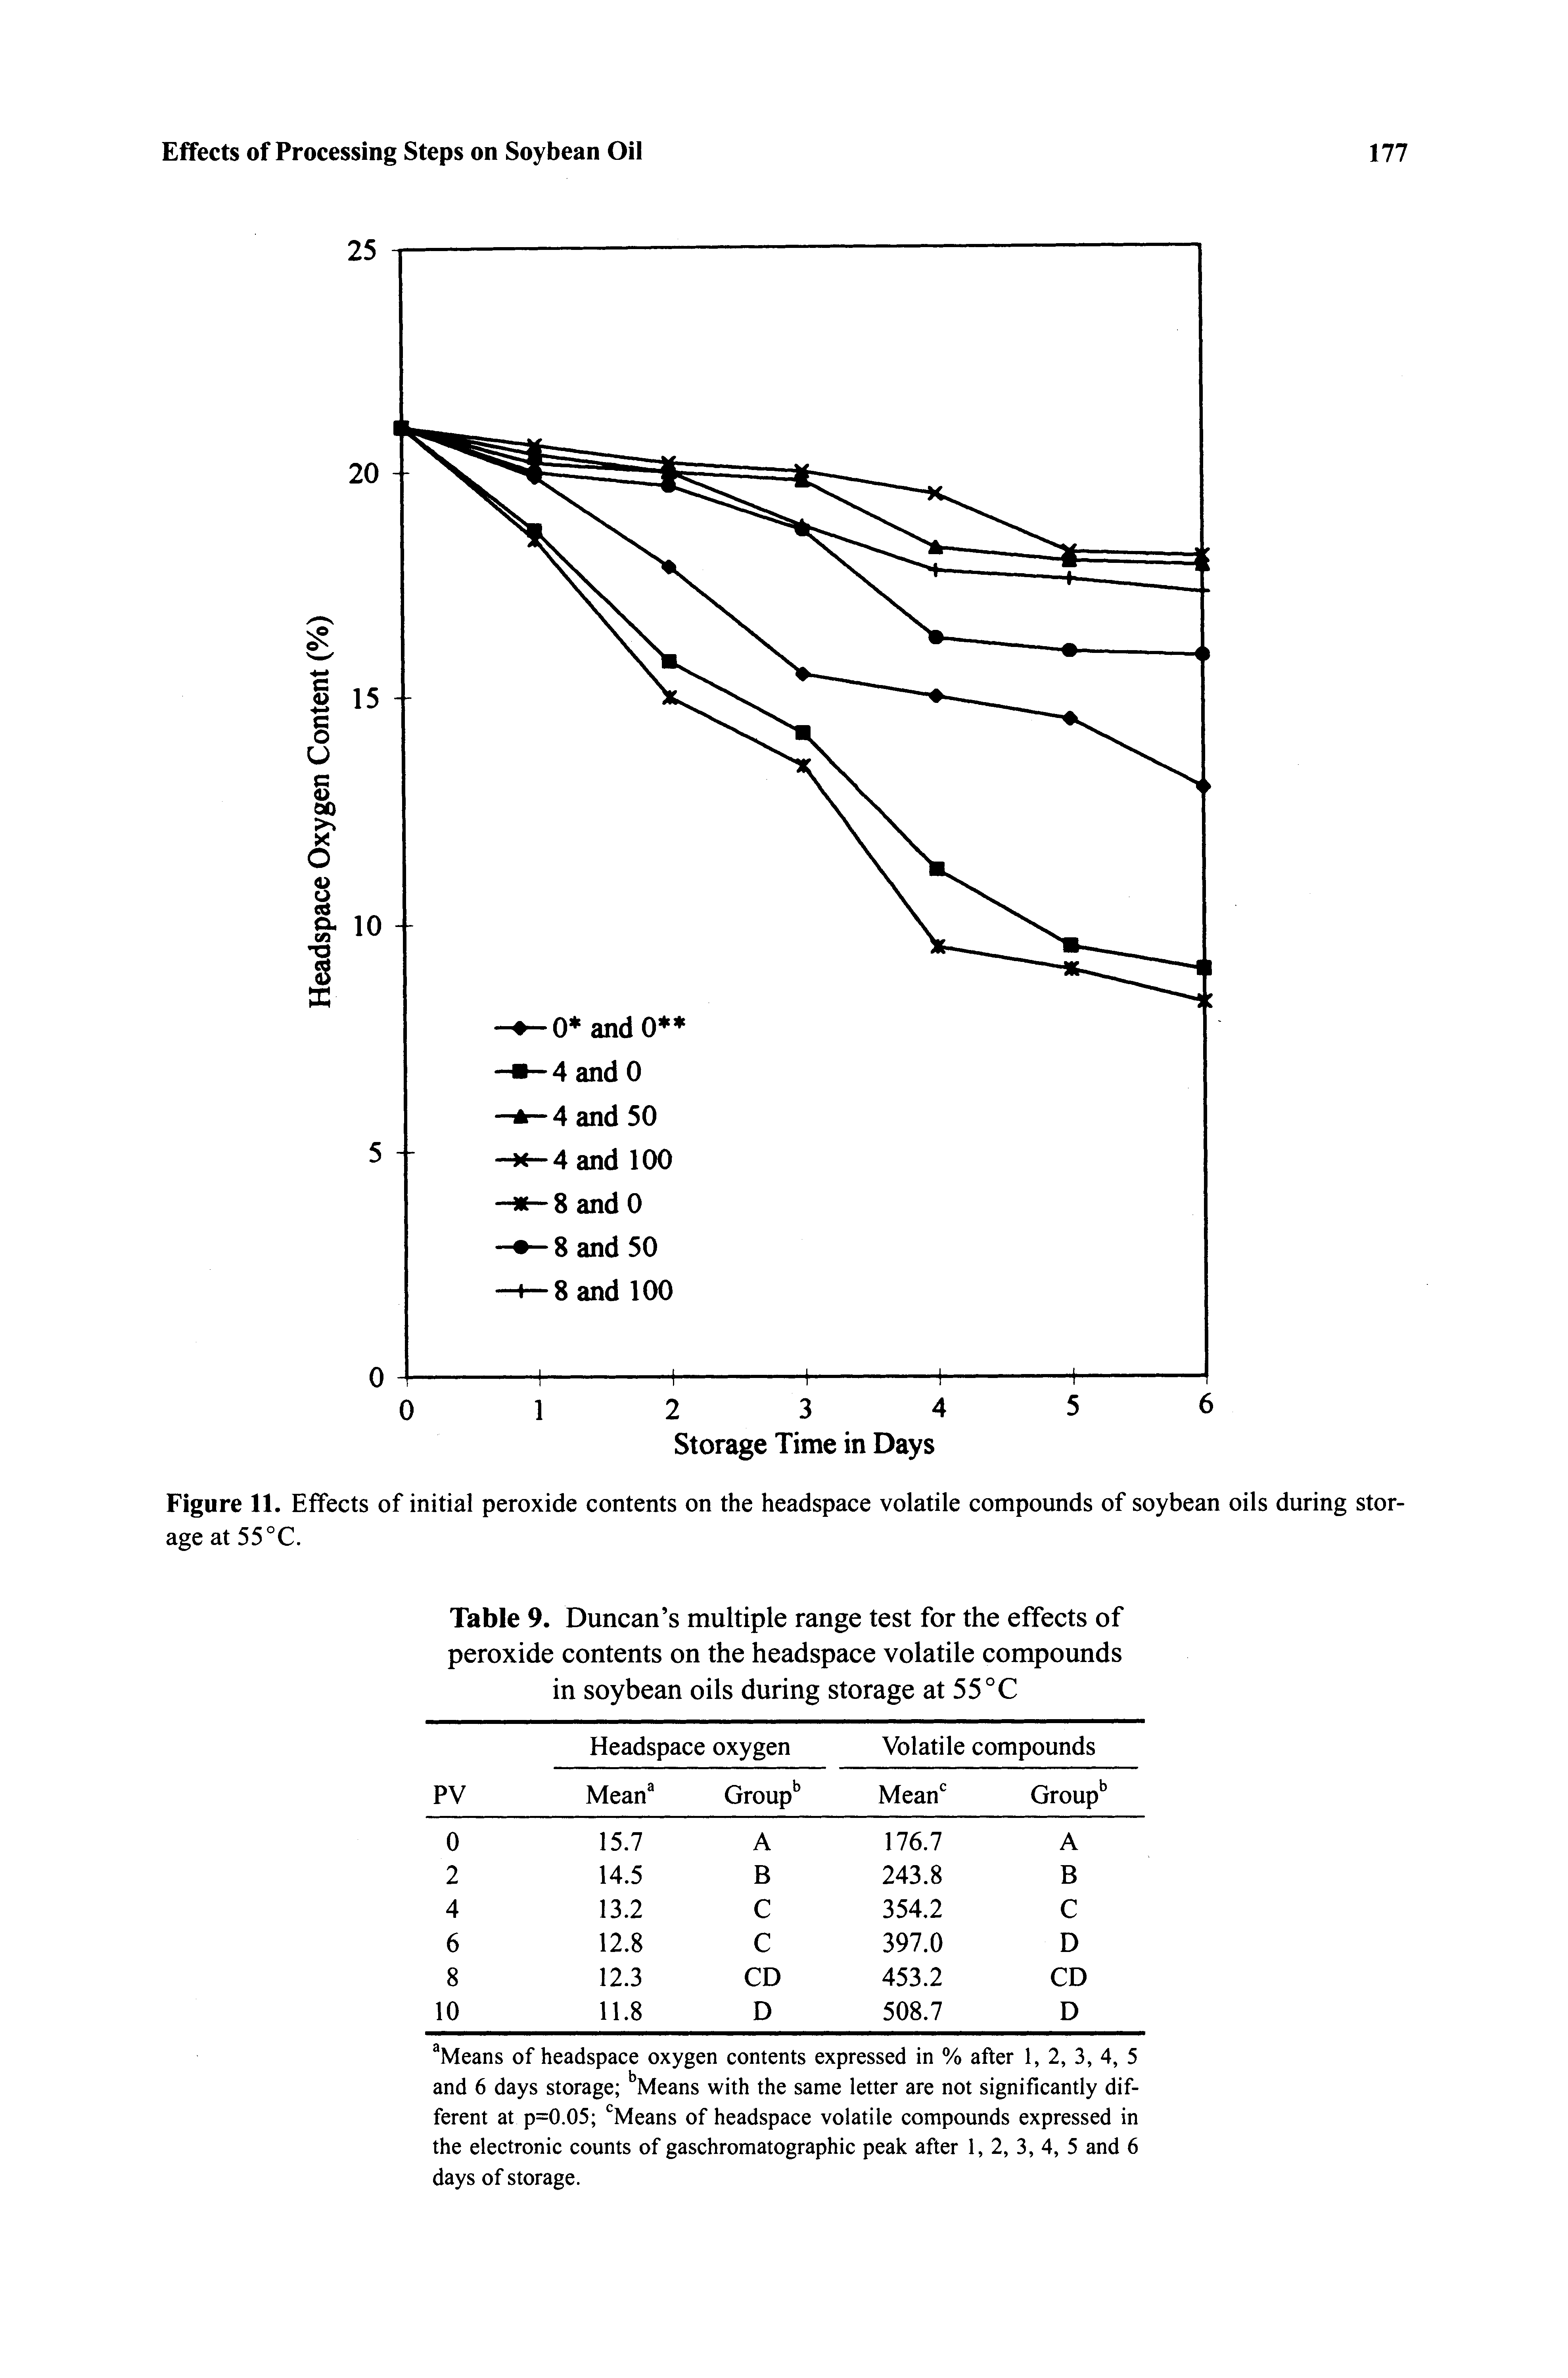 Figure 11. Effects of initial peroxide contents on the headspace volatile compounds of soybean oils during storage at 55°C.